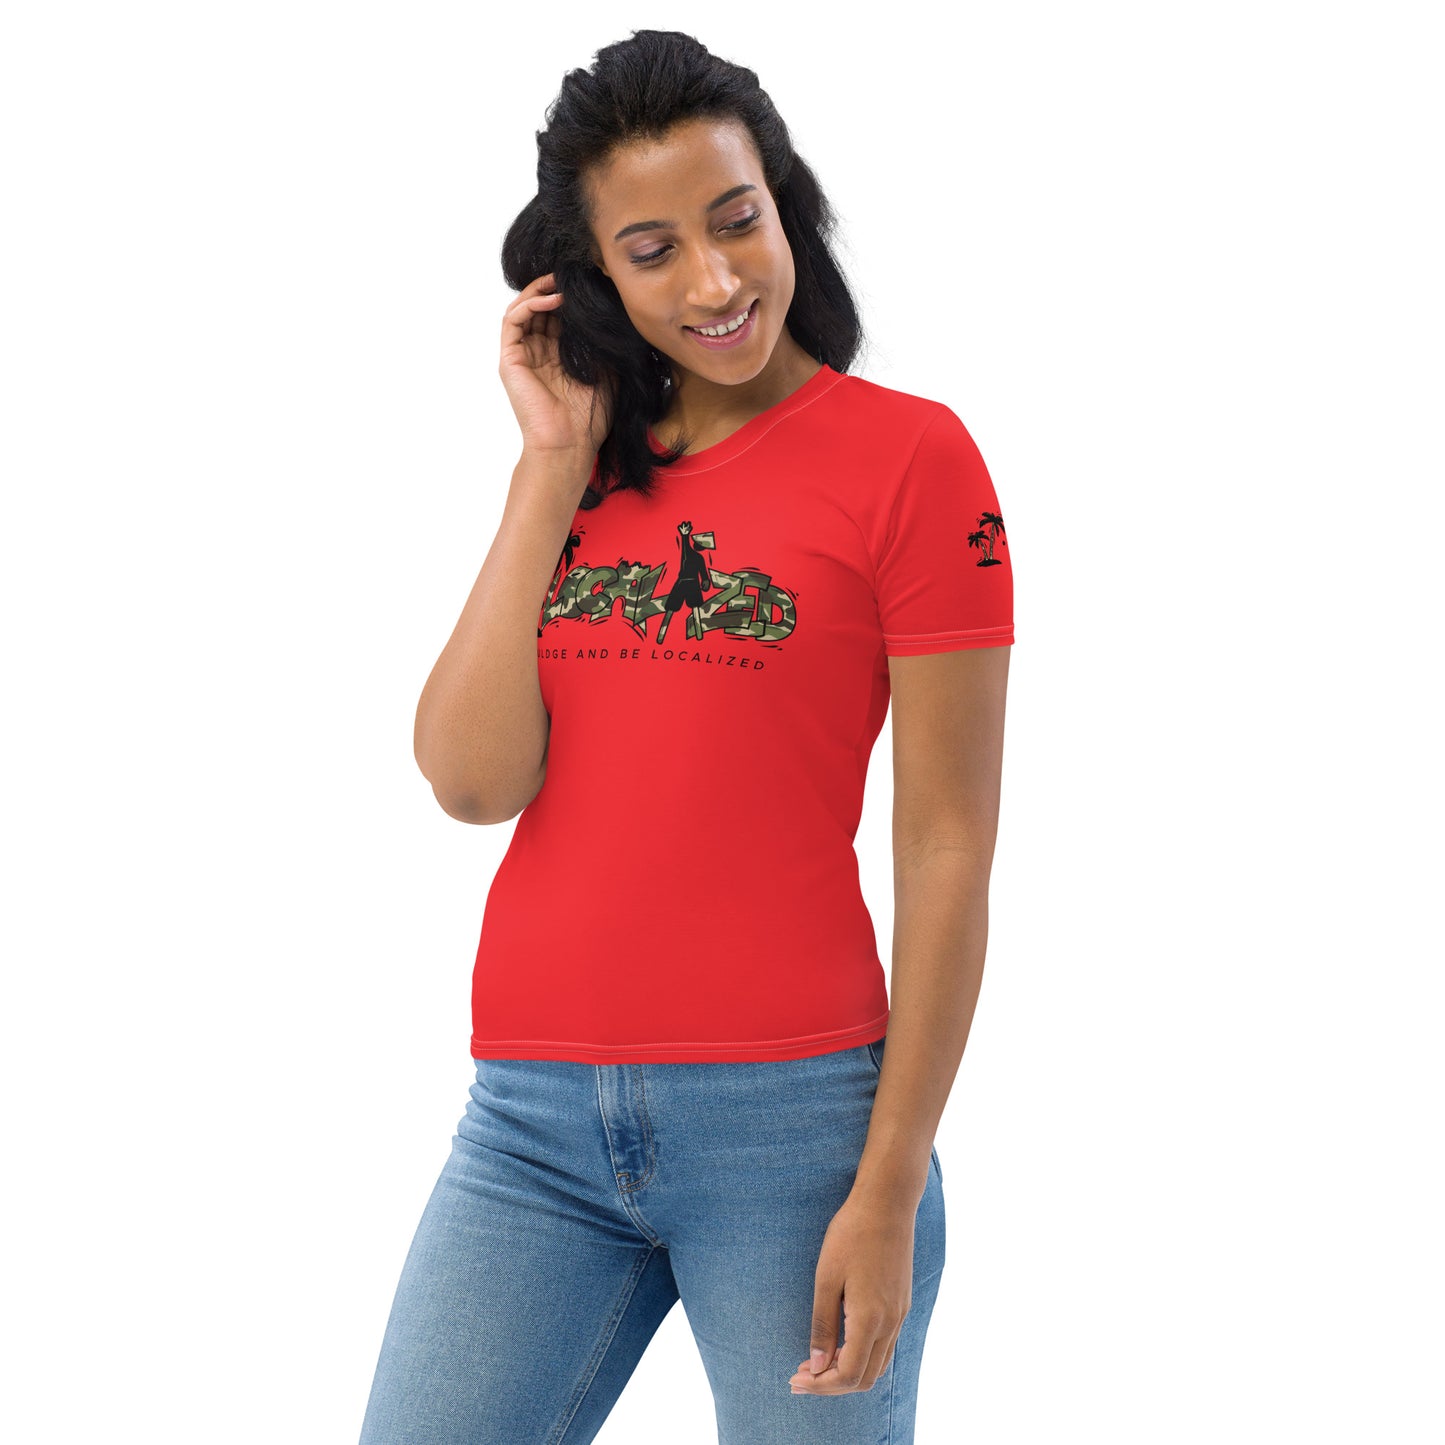 Red V.Localized (Camo) Women’s Dry-Fit T-Shirt